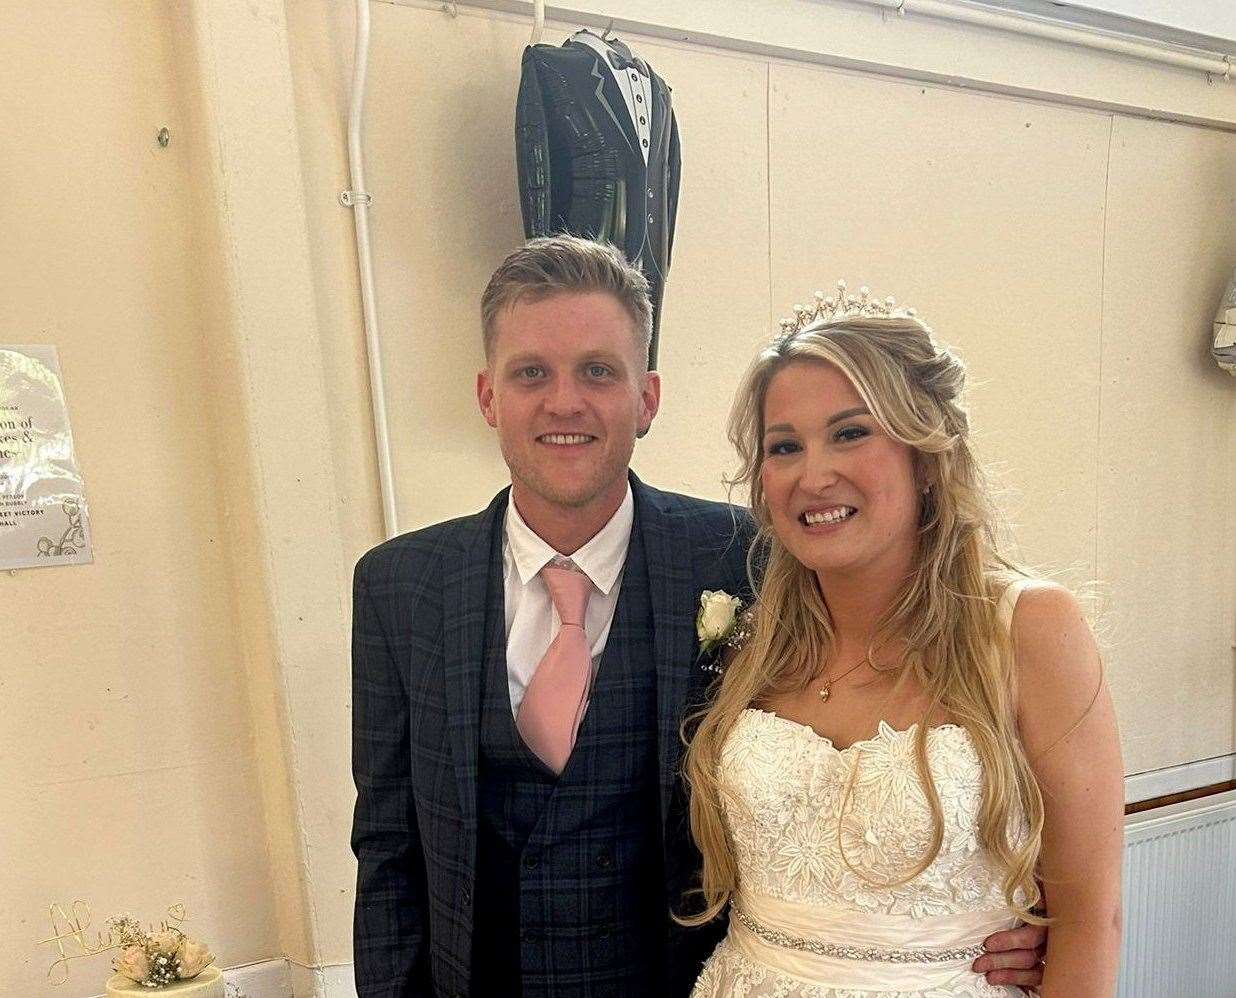 Amy Louise Barnes and Rhys Pryor saved more than £16,000 on their wedding by bagging second-hand outfits and buying Buck's fizz from Aldi. Picture: SWNS